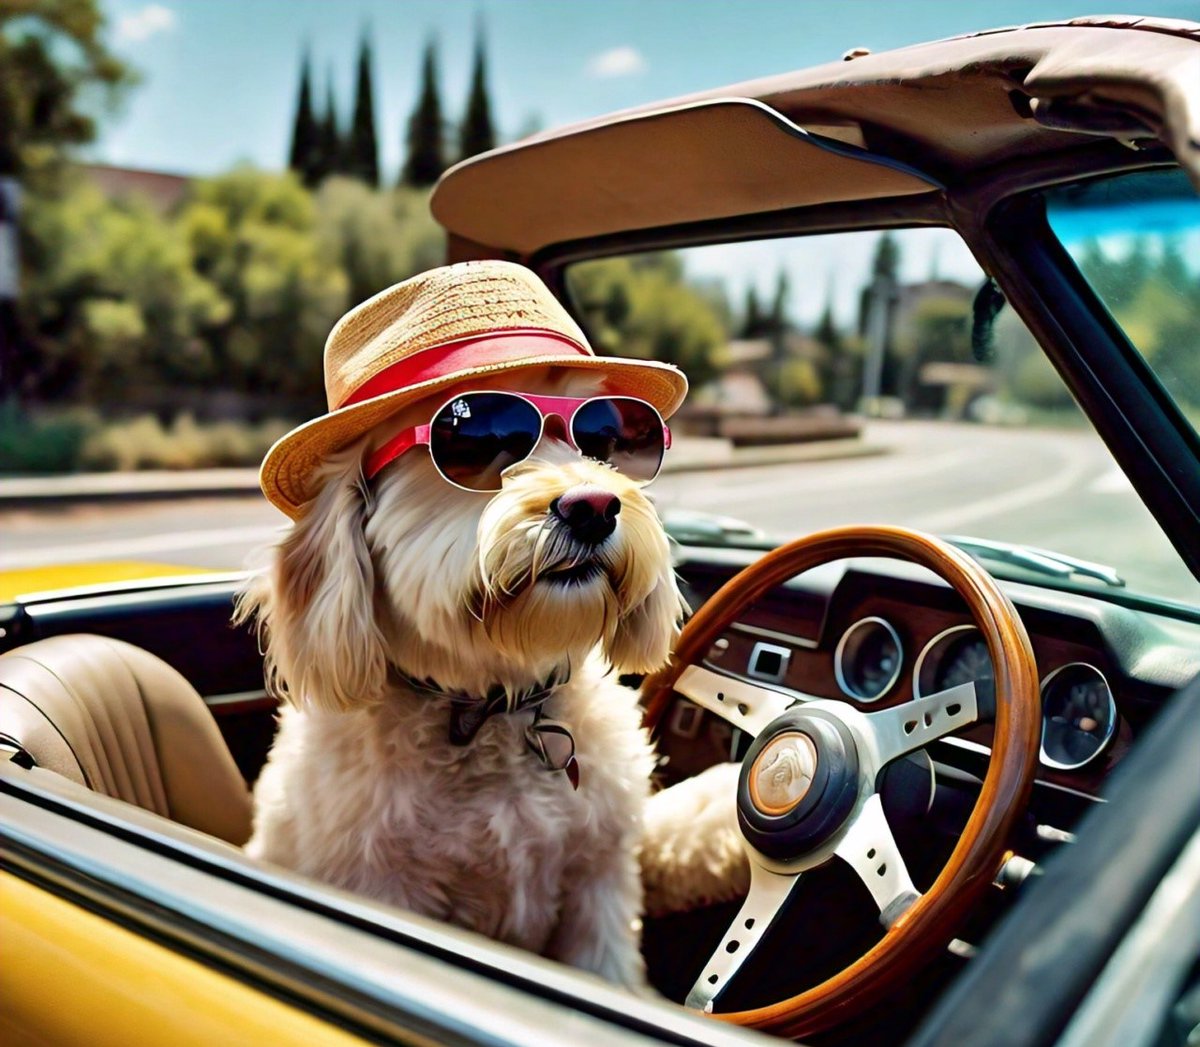 Why did Fido take the wheel? Because he heard we offer 'paw-some' pet care services! 🐾 #PetCare #DogLife #PetCareServices #FurBaby